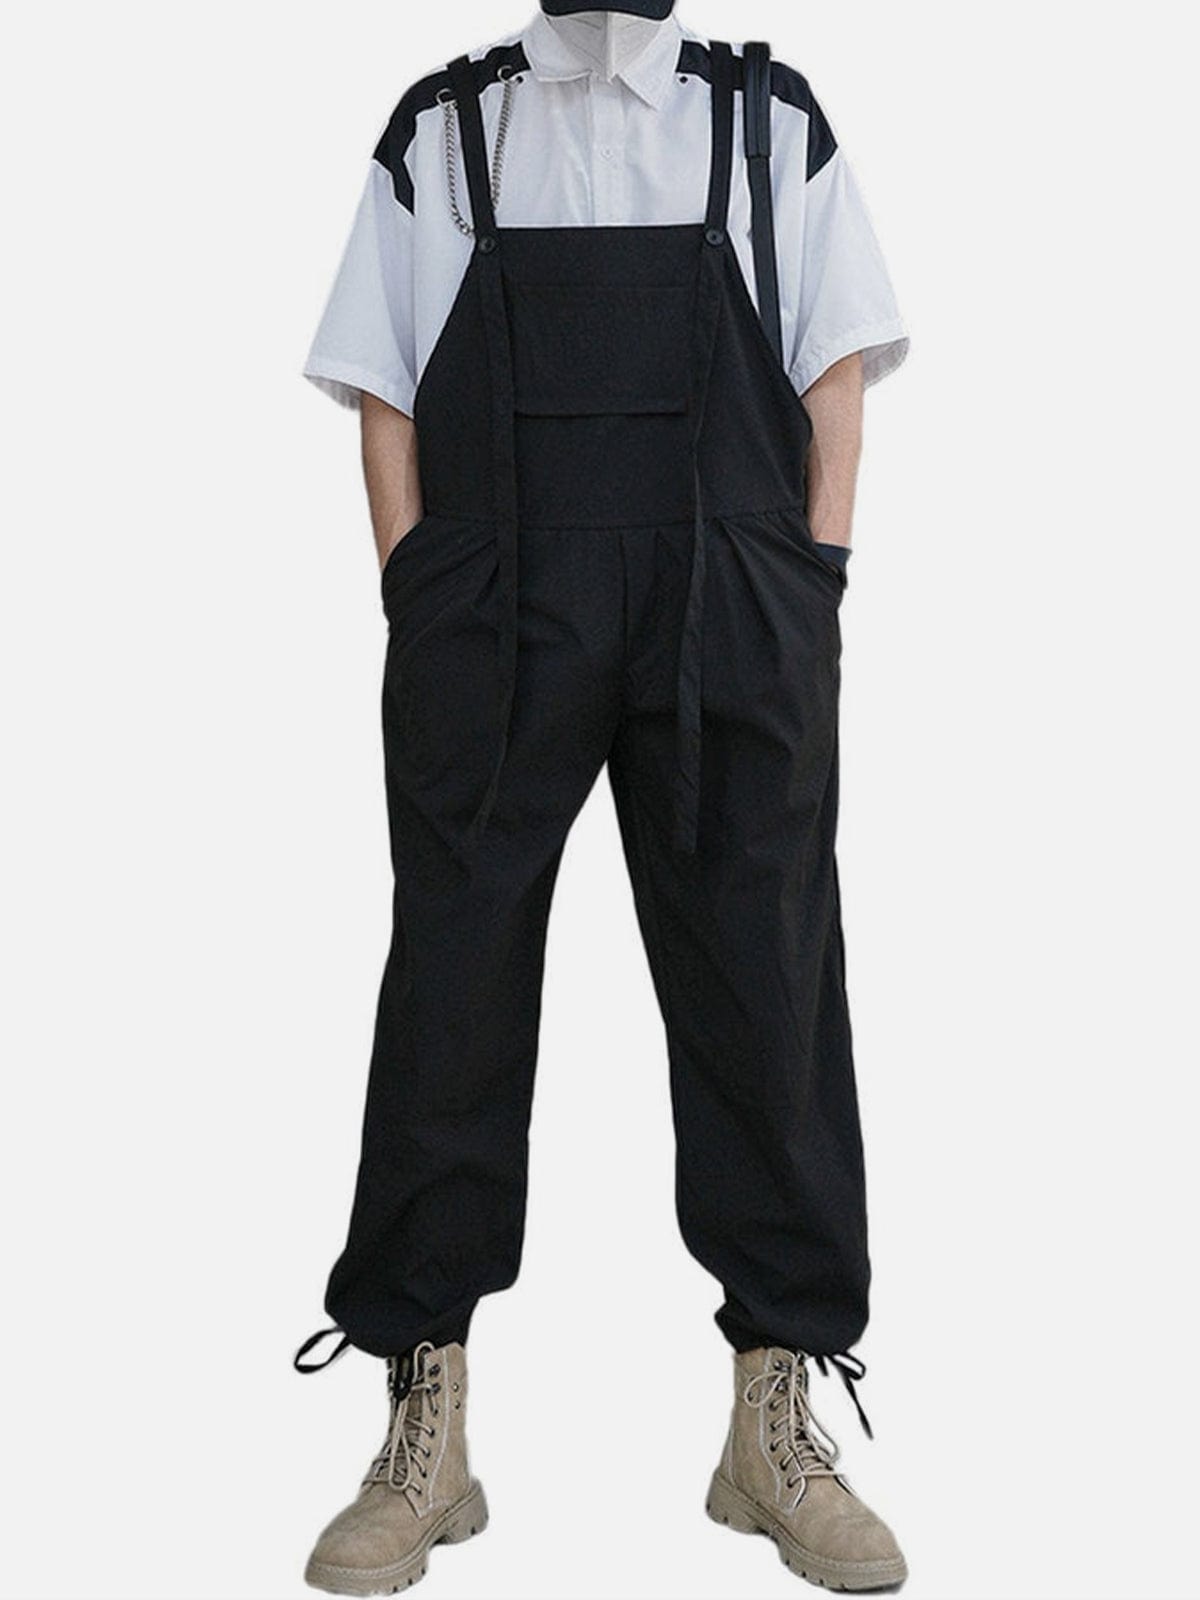 Bandage Ribbons Cotton Overalls Streetwear Brand Techwear Combat Tactical YUGEN THEORY